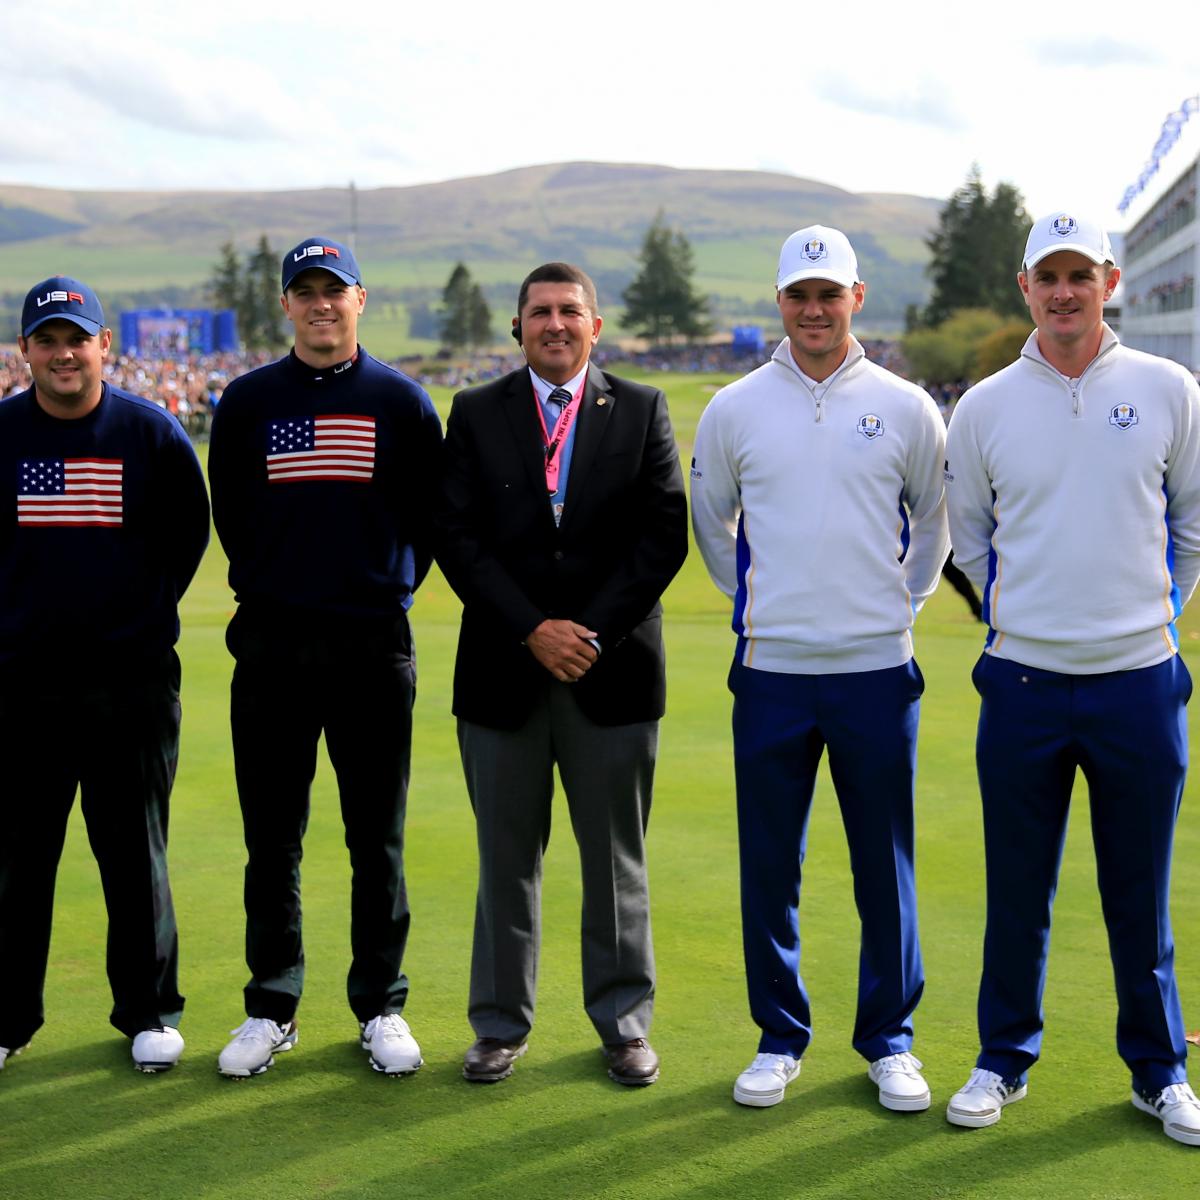 Ryder Cup 2014: How to View Live Scores, Points and Standings Updates